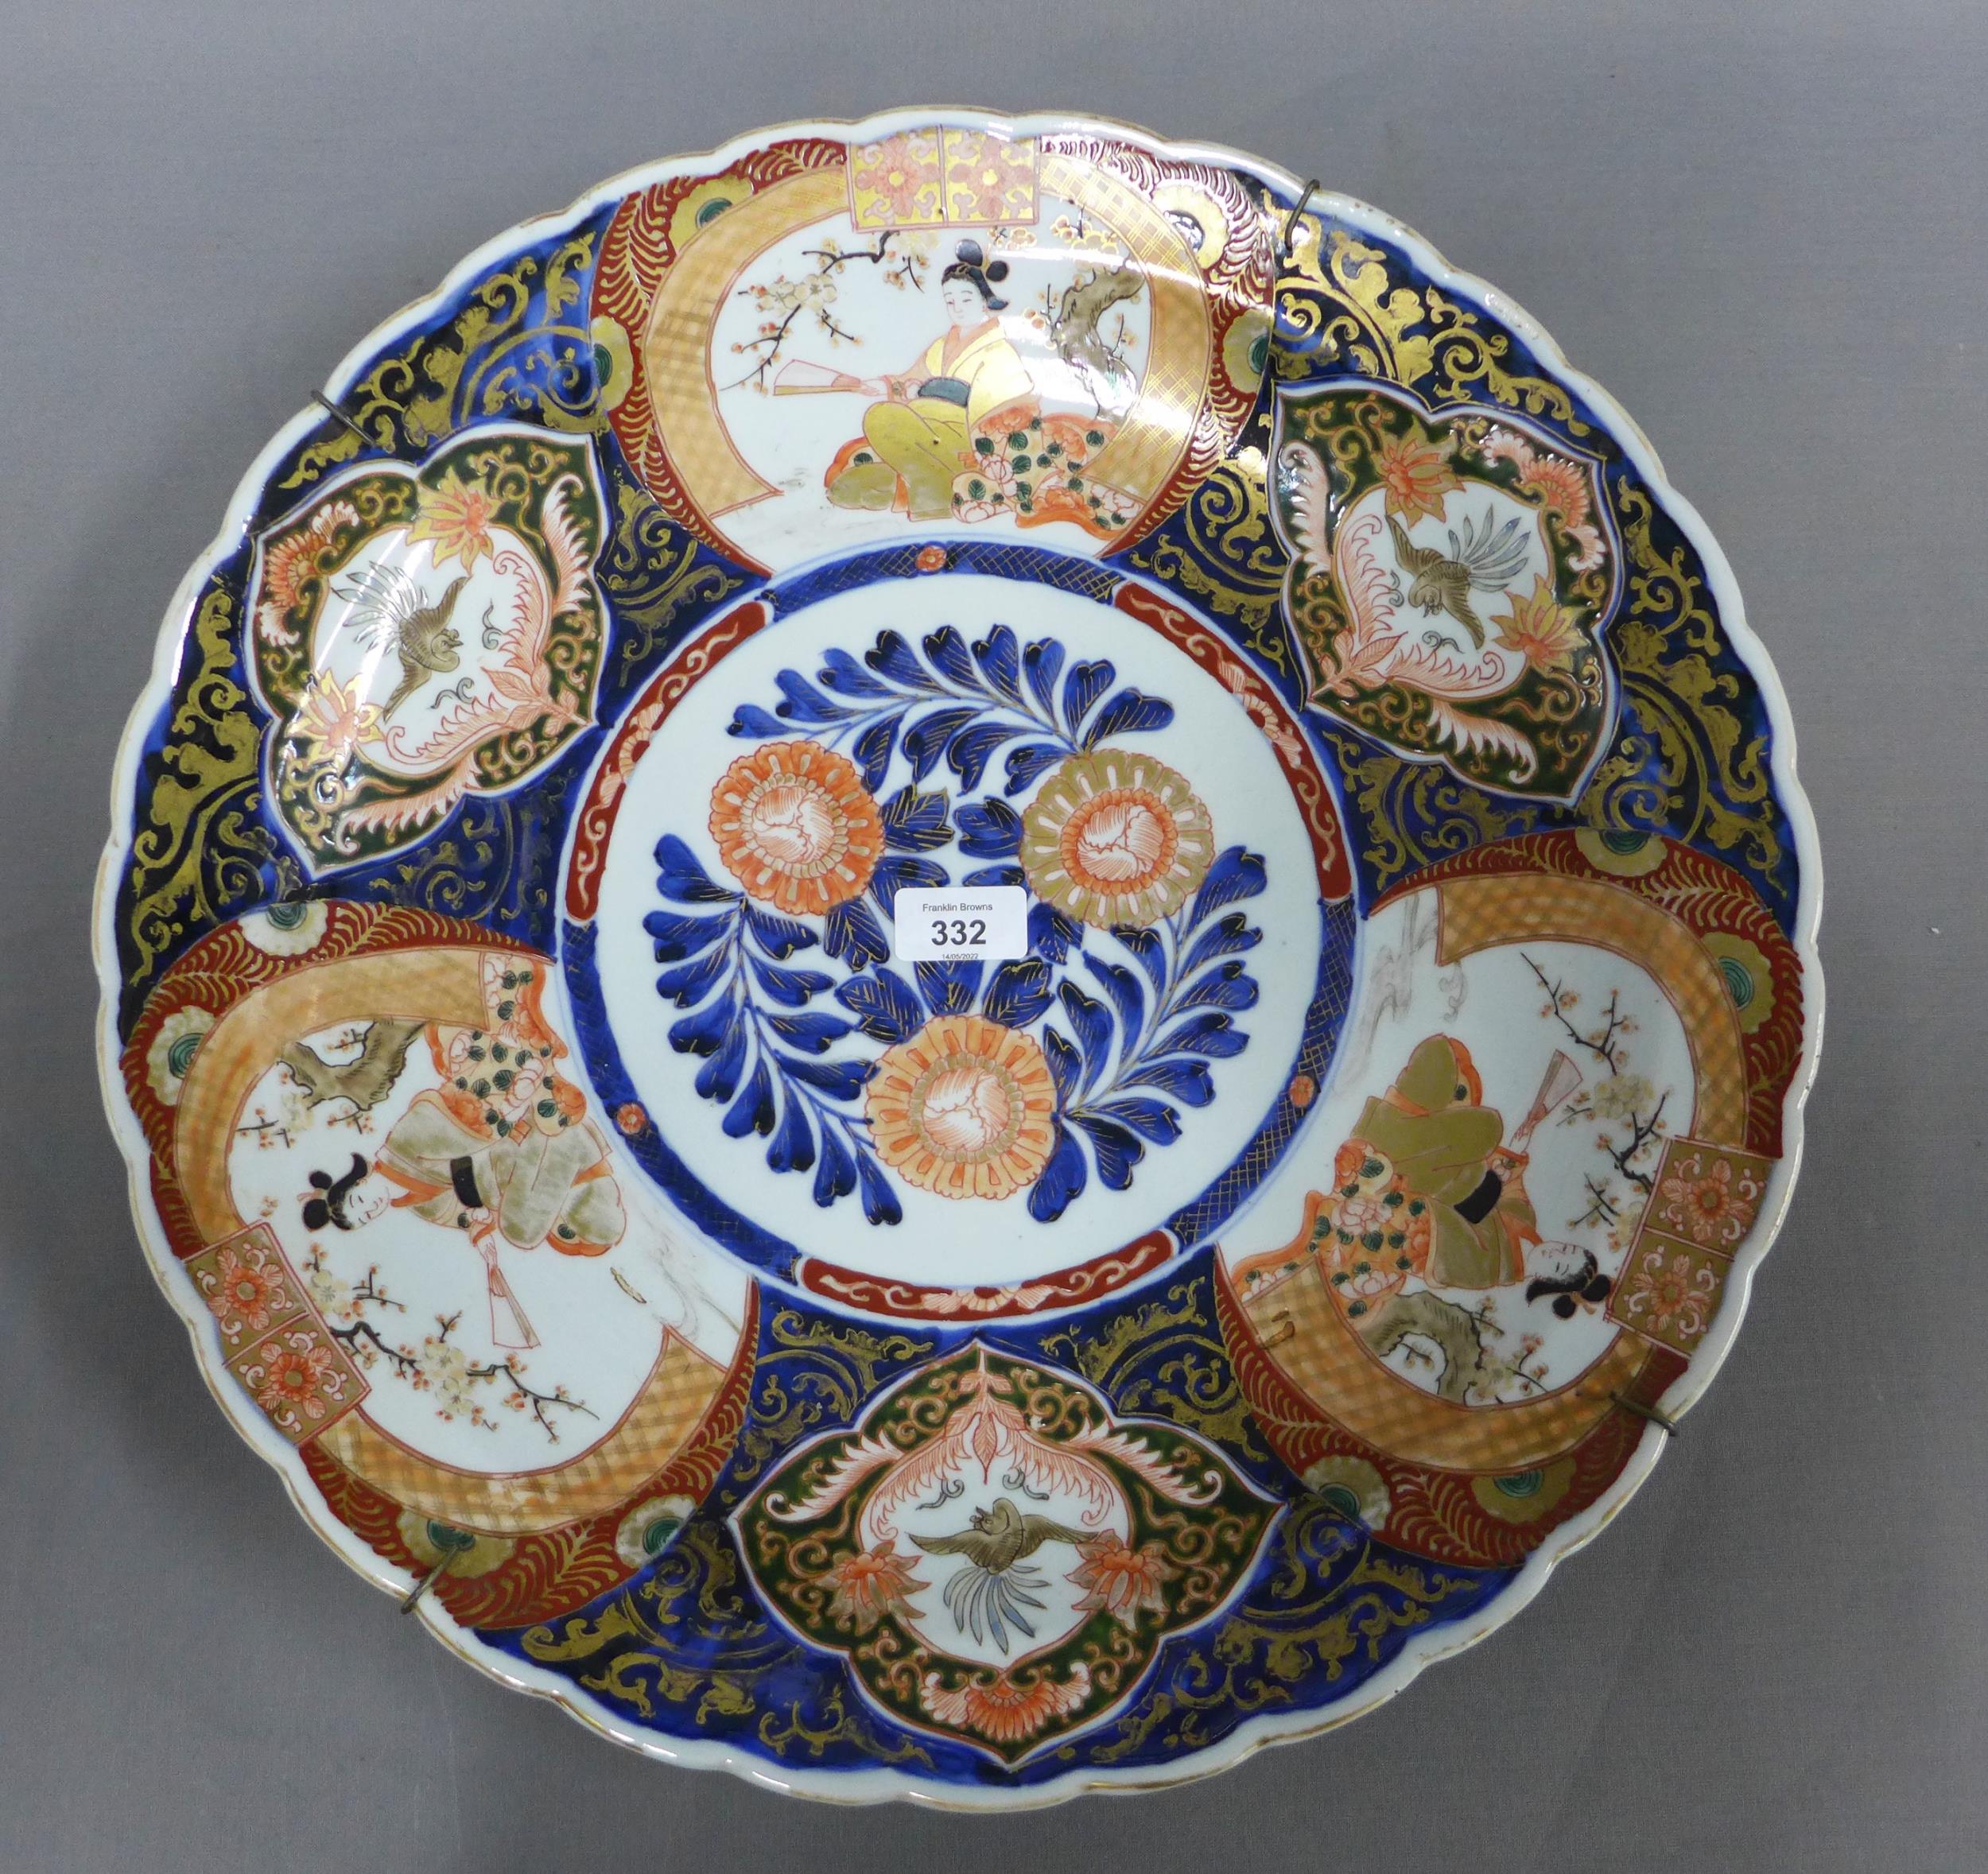 Large Imari charger, scallop edge with typical pattern of flowers and foliage, 46cm